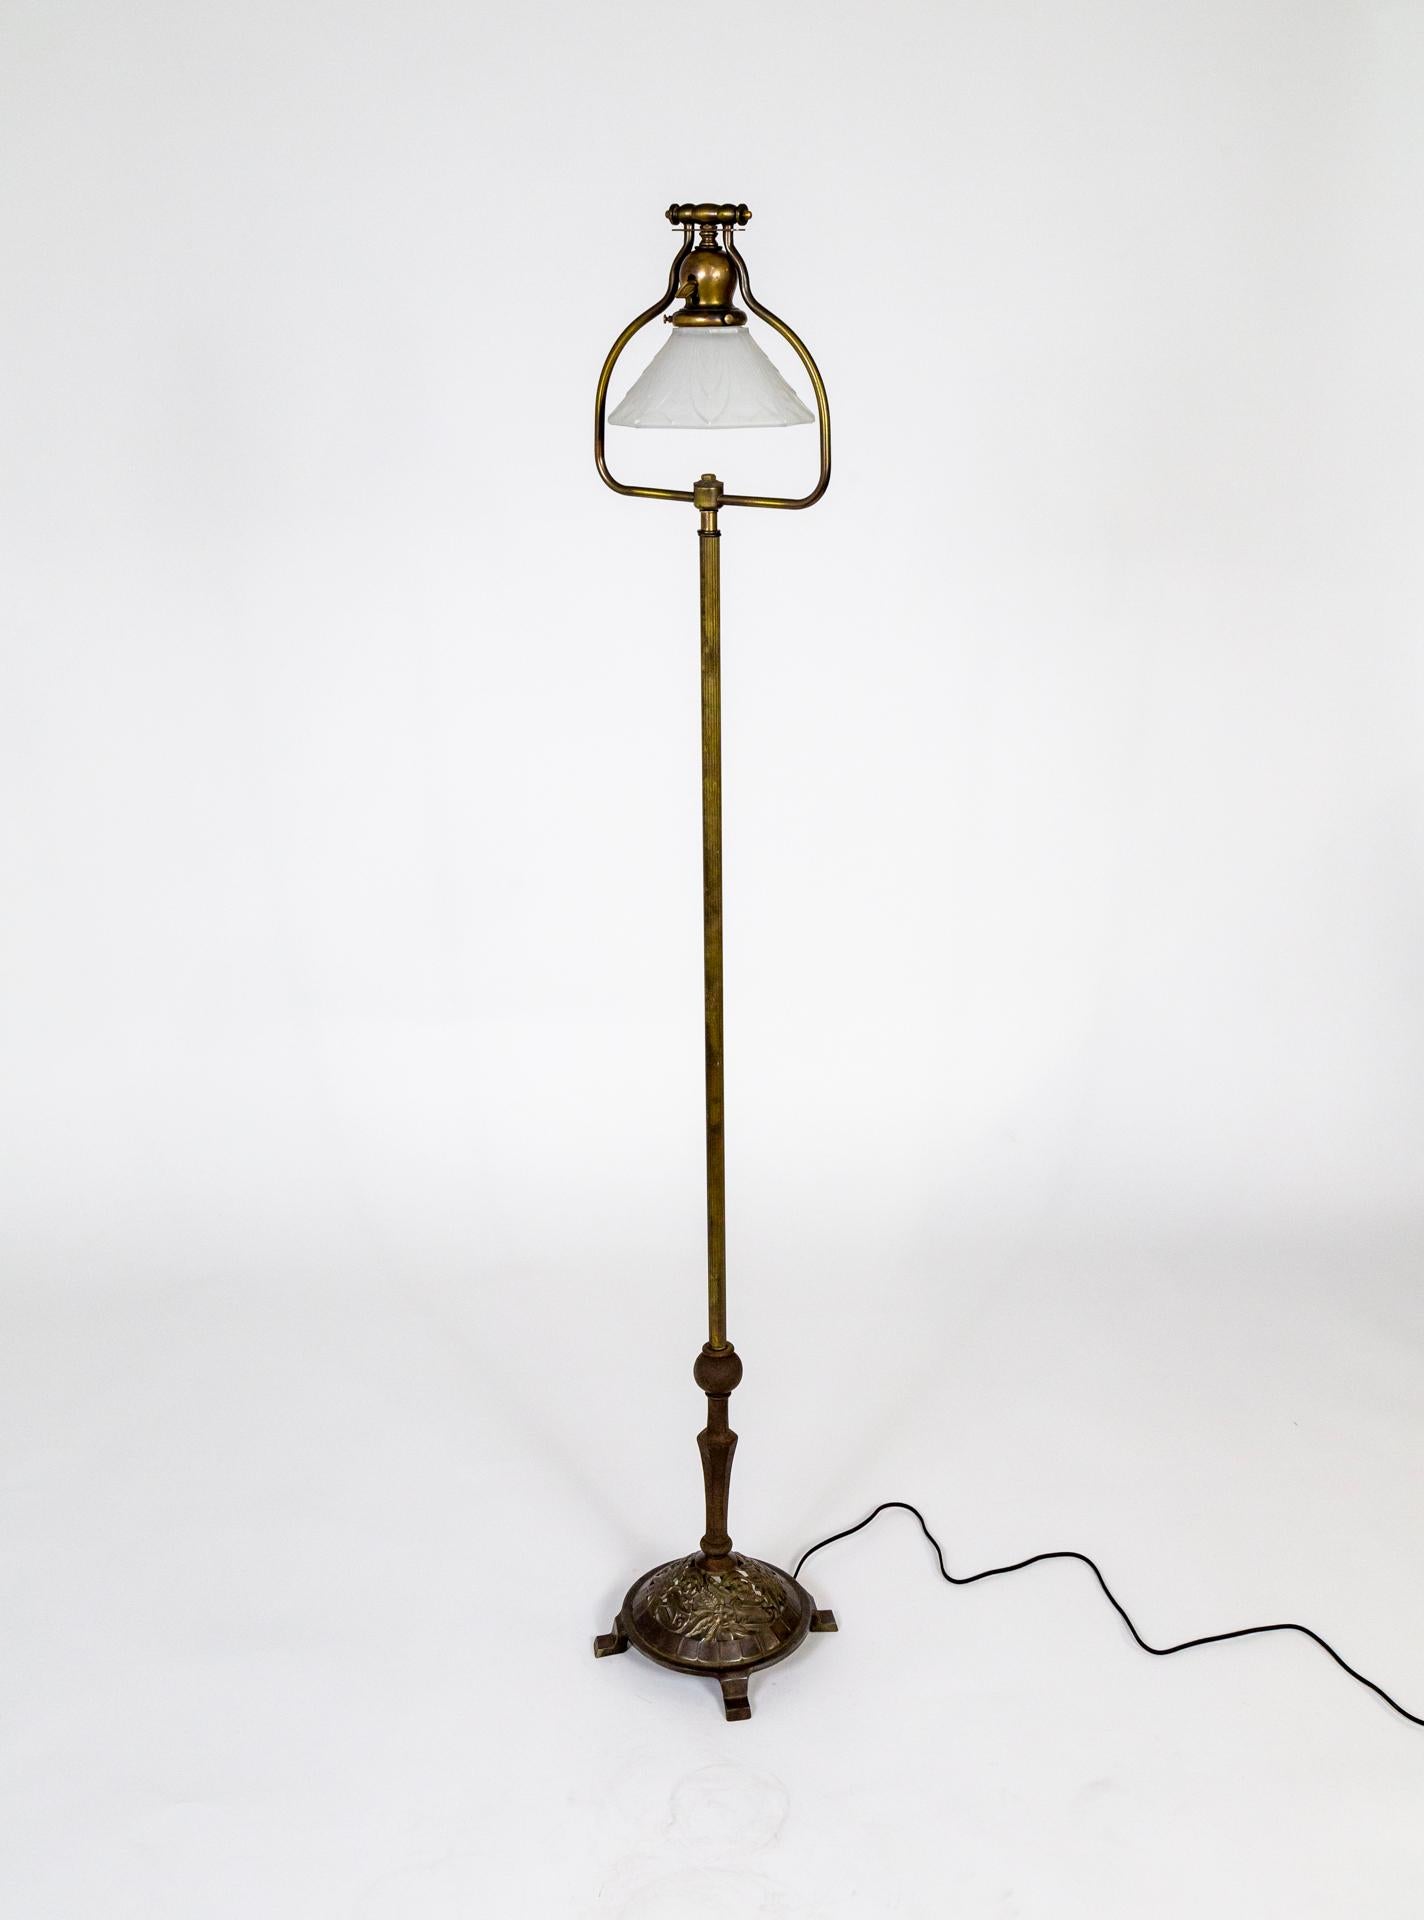 20th Century Craftsman Harp Floor Lamp w/ Floral Base & Molded Glass Shade For Sale